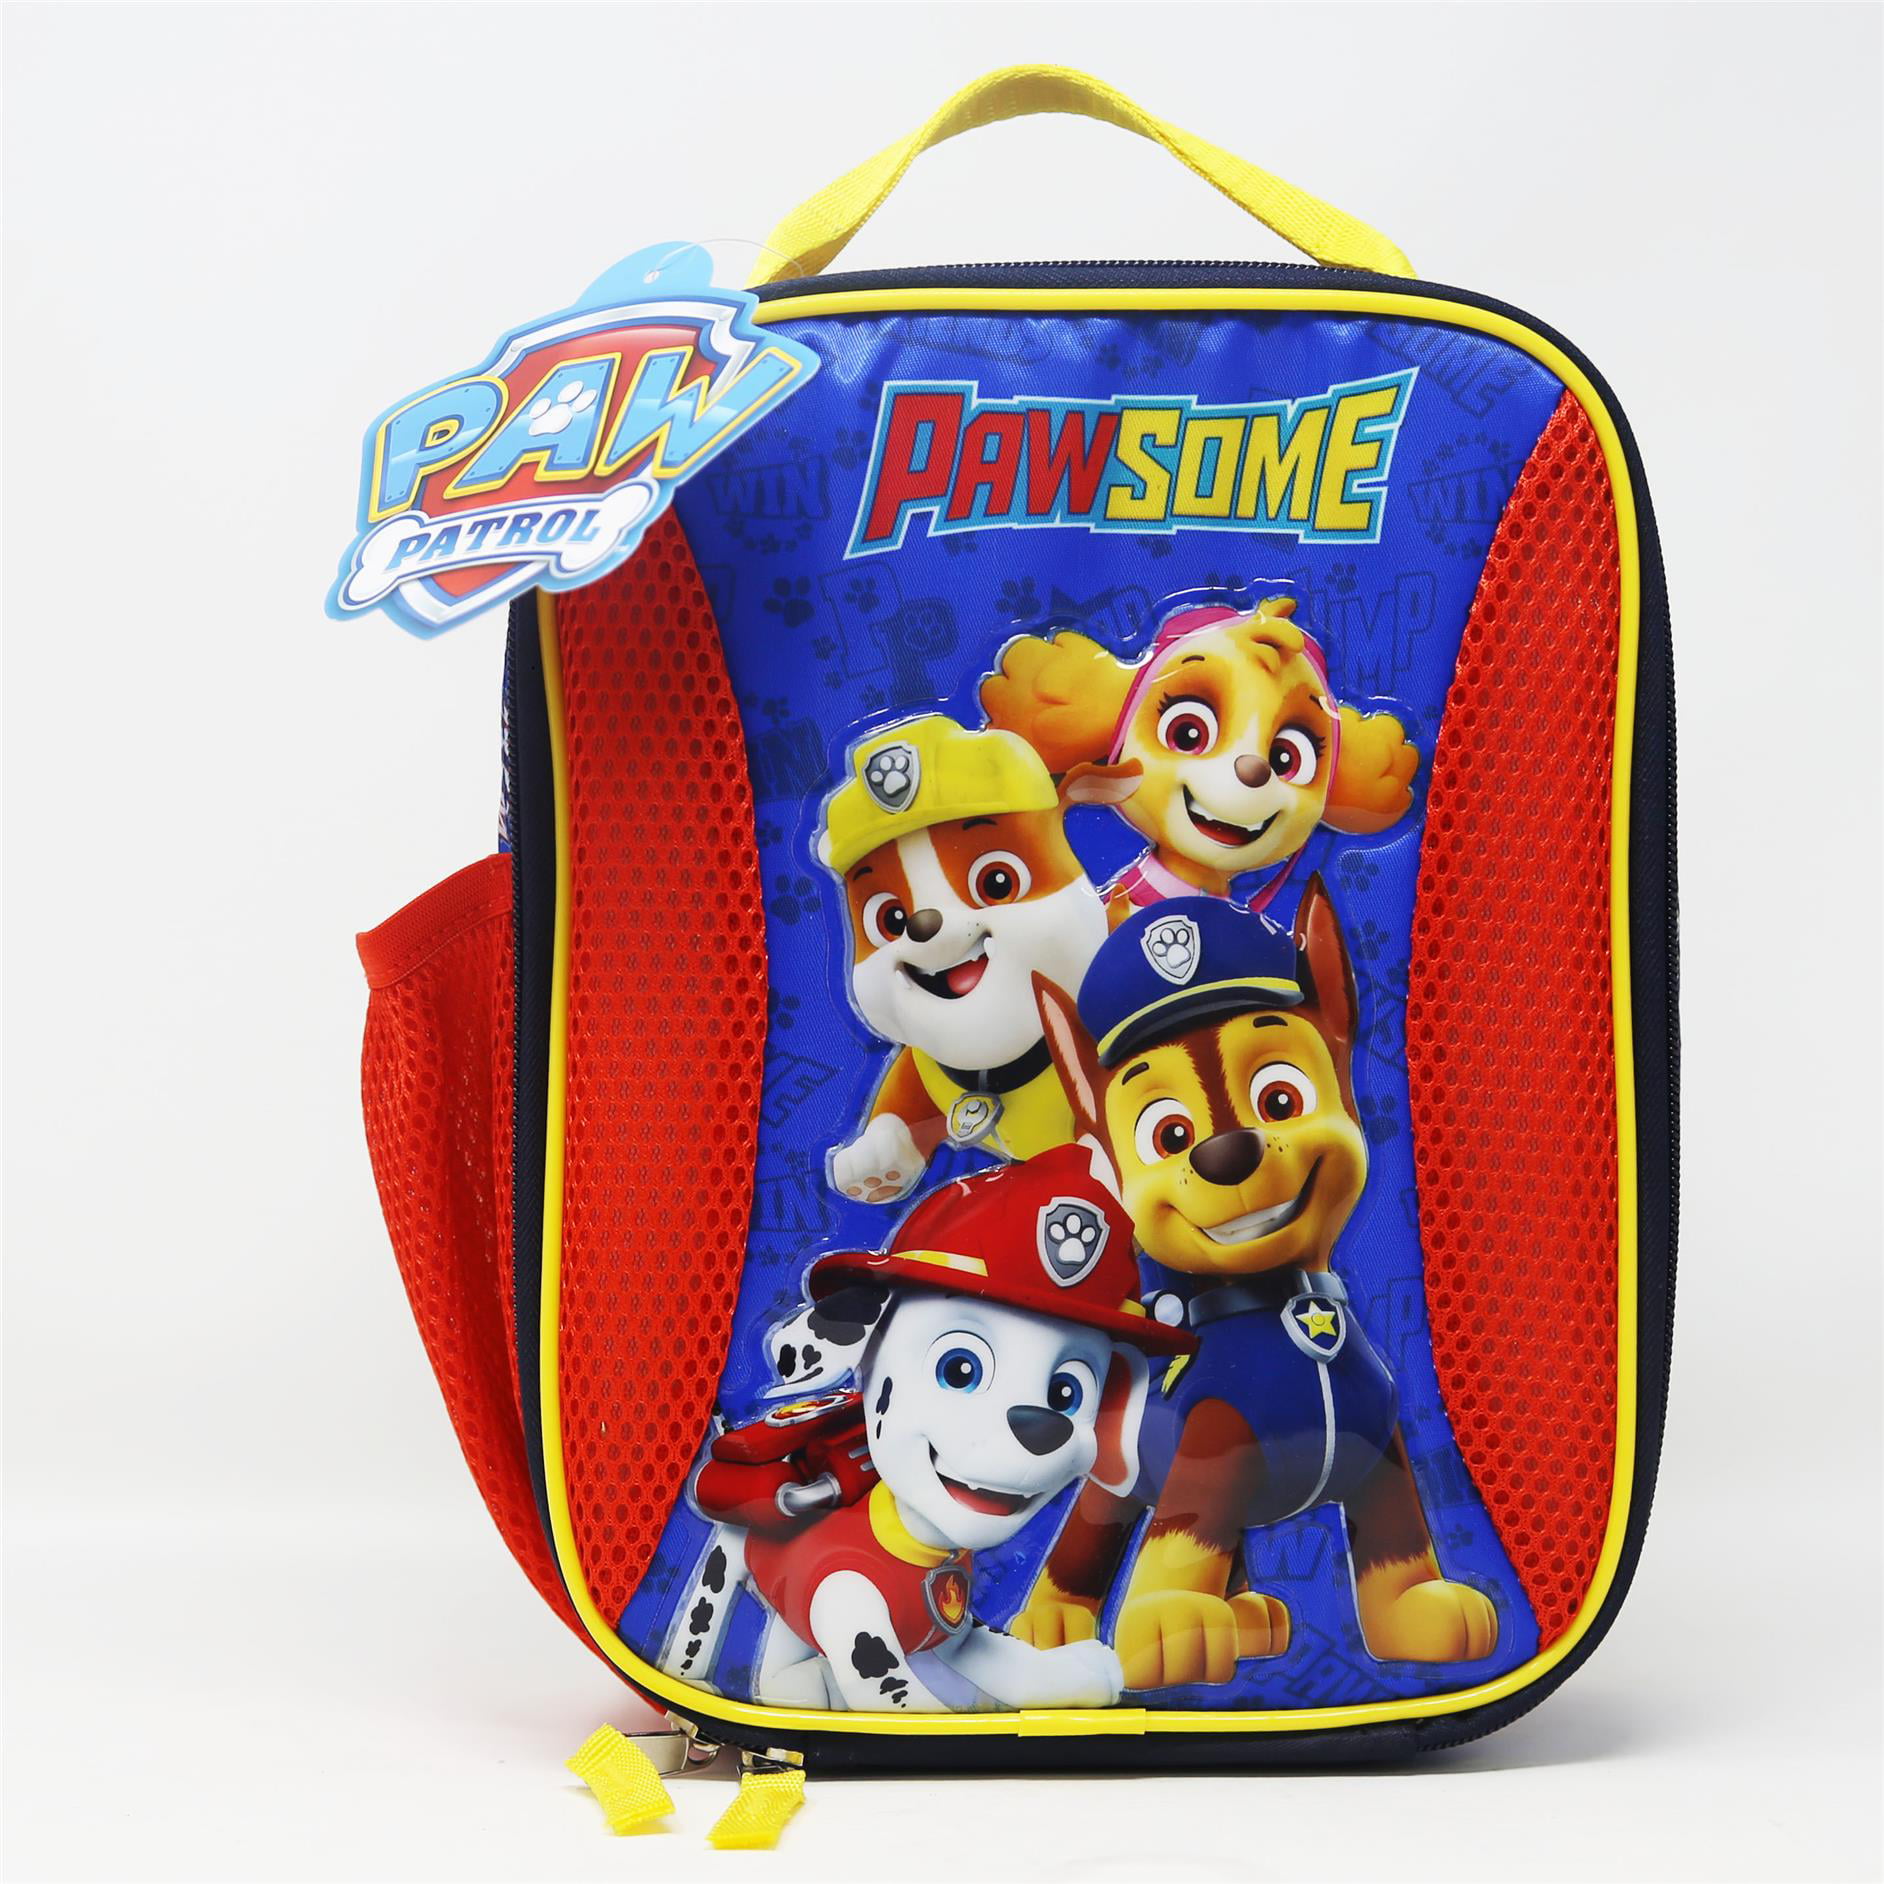 Paw Patrol Rectangle Lunch Bag Blue 843340167640 